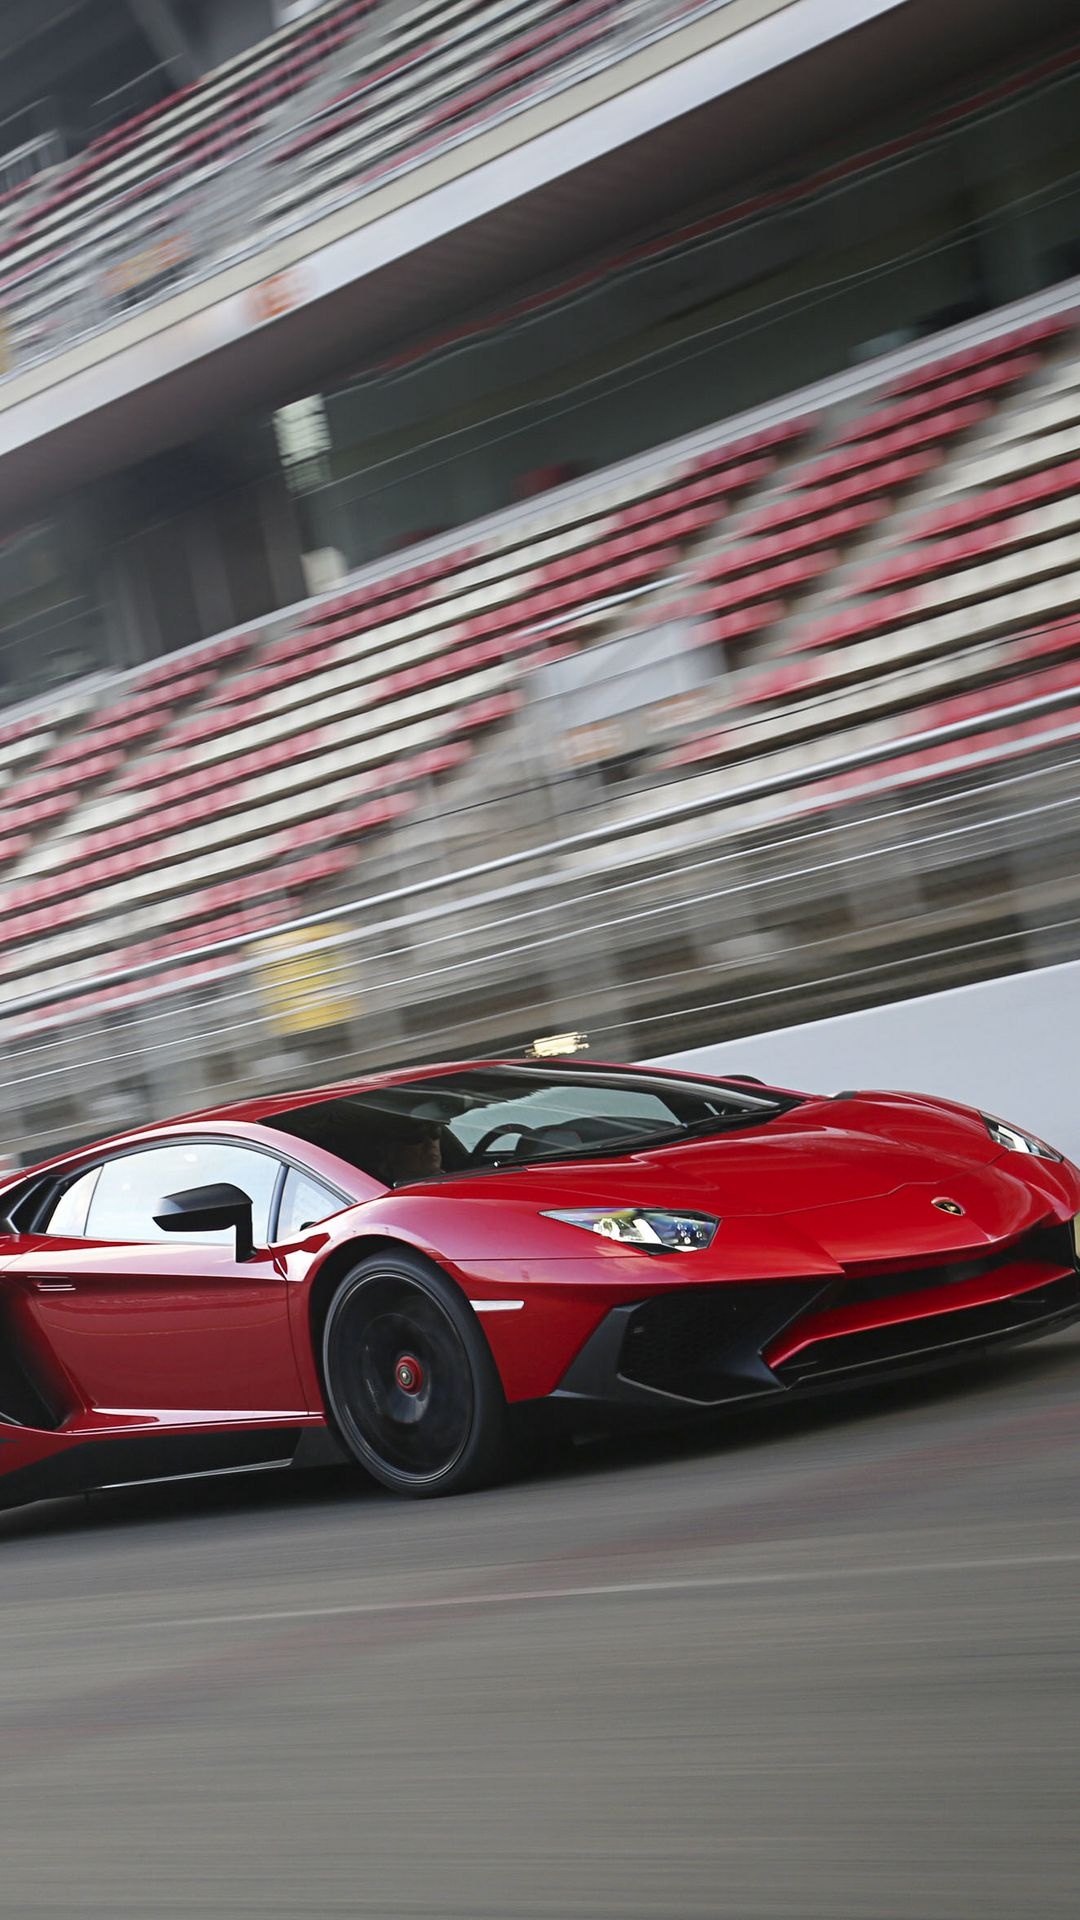 Aventador wallpapers, Smartphone backgrounds, Stunning visuals, Automotive excellence, 1080x1920 Full HD Handy